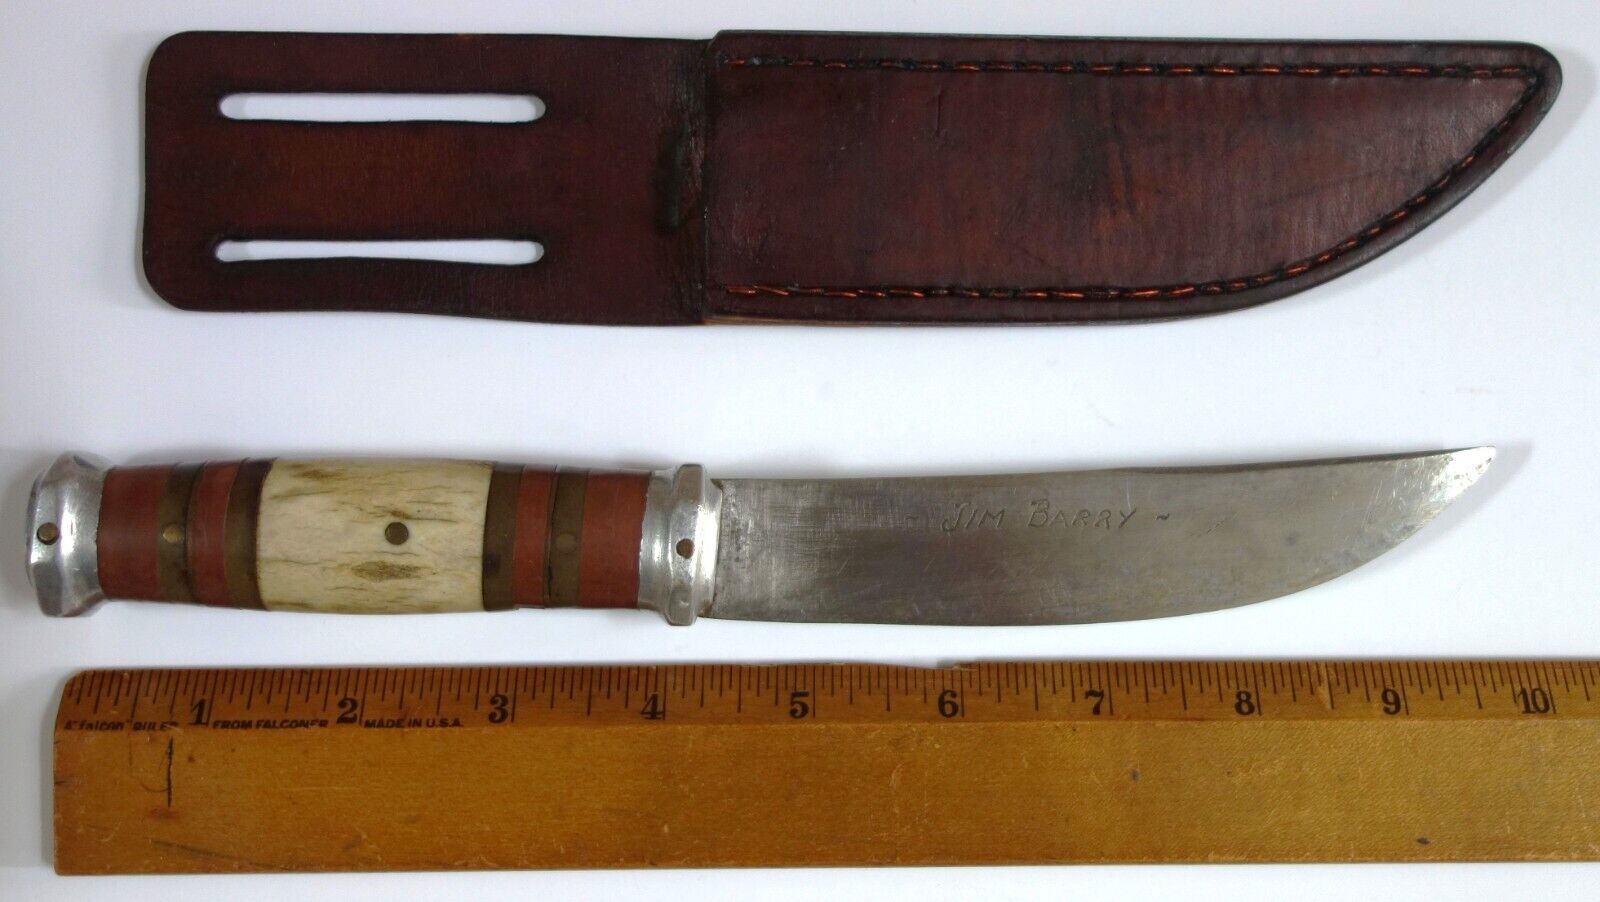 Vintage Circa 1975 Jim Barry SIGNED Hunting / Camping Knife and Leather Sheath.